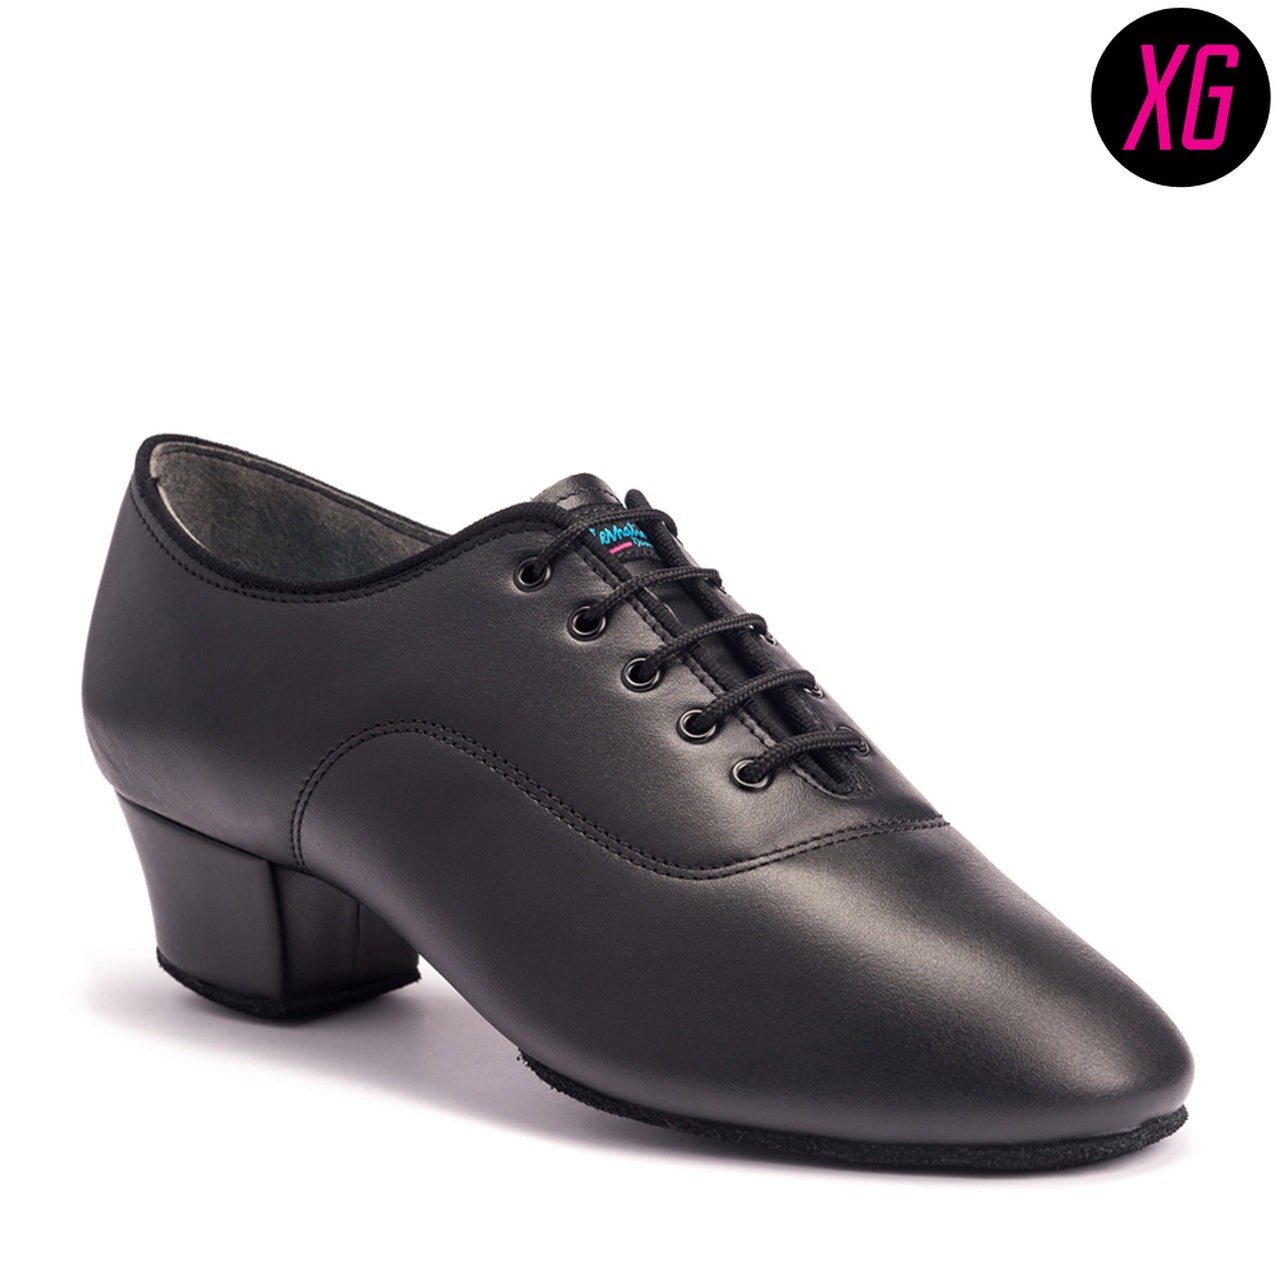 International Dance Shoes IDS Rumba XG Men's Latin Shoe with Enhanced Sole Grip Available in Black Calf or Black Nubuck